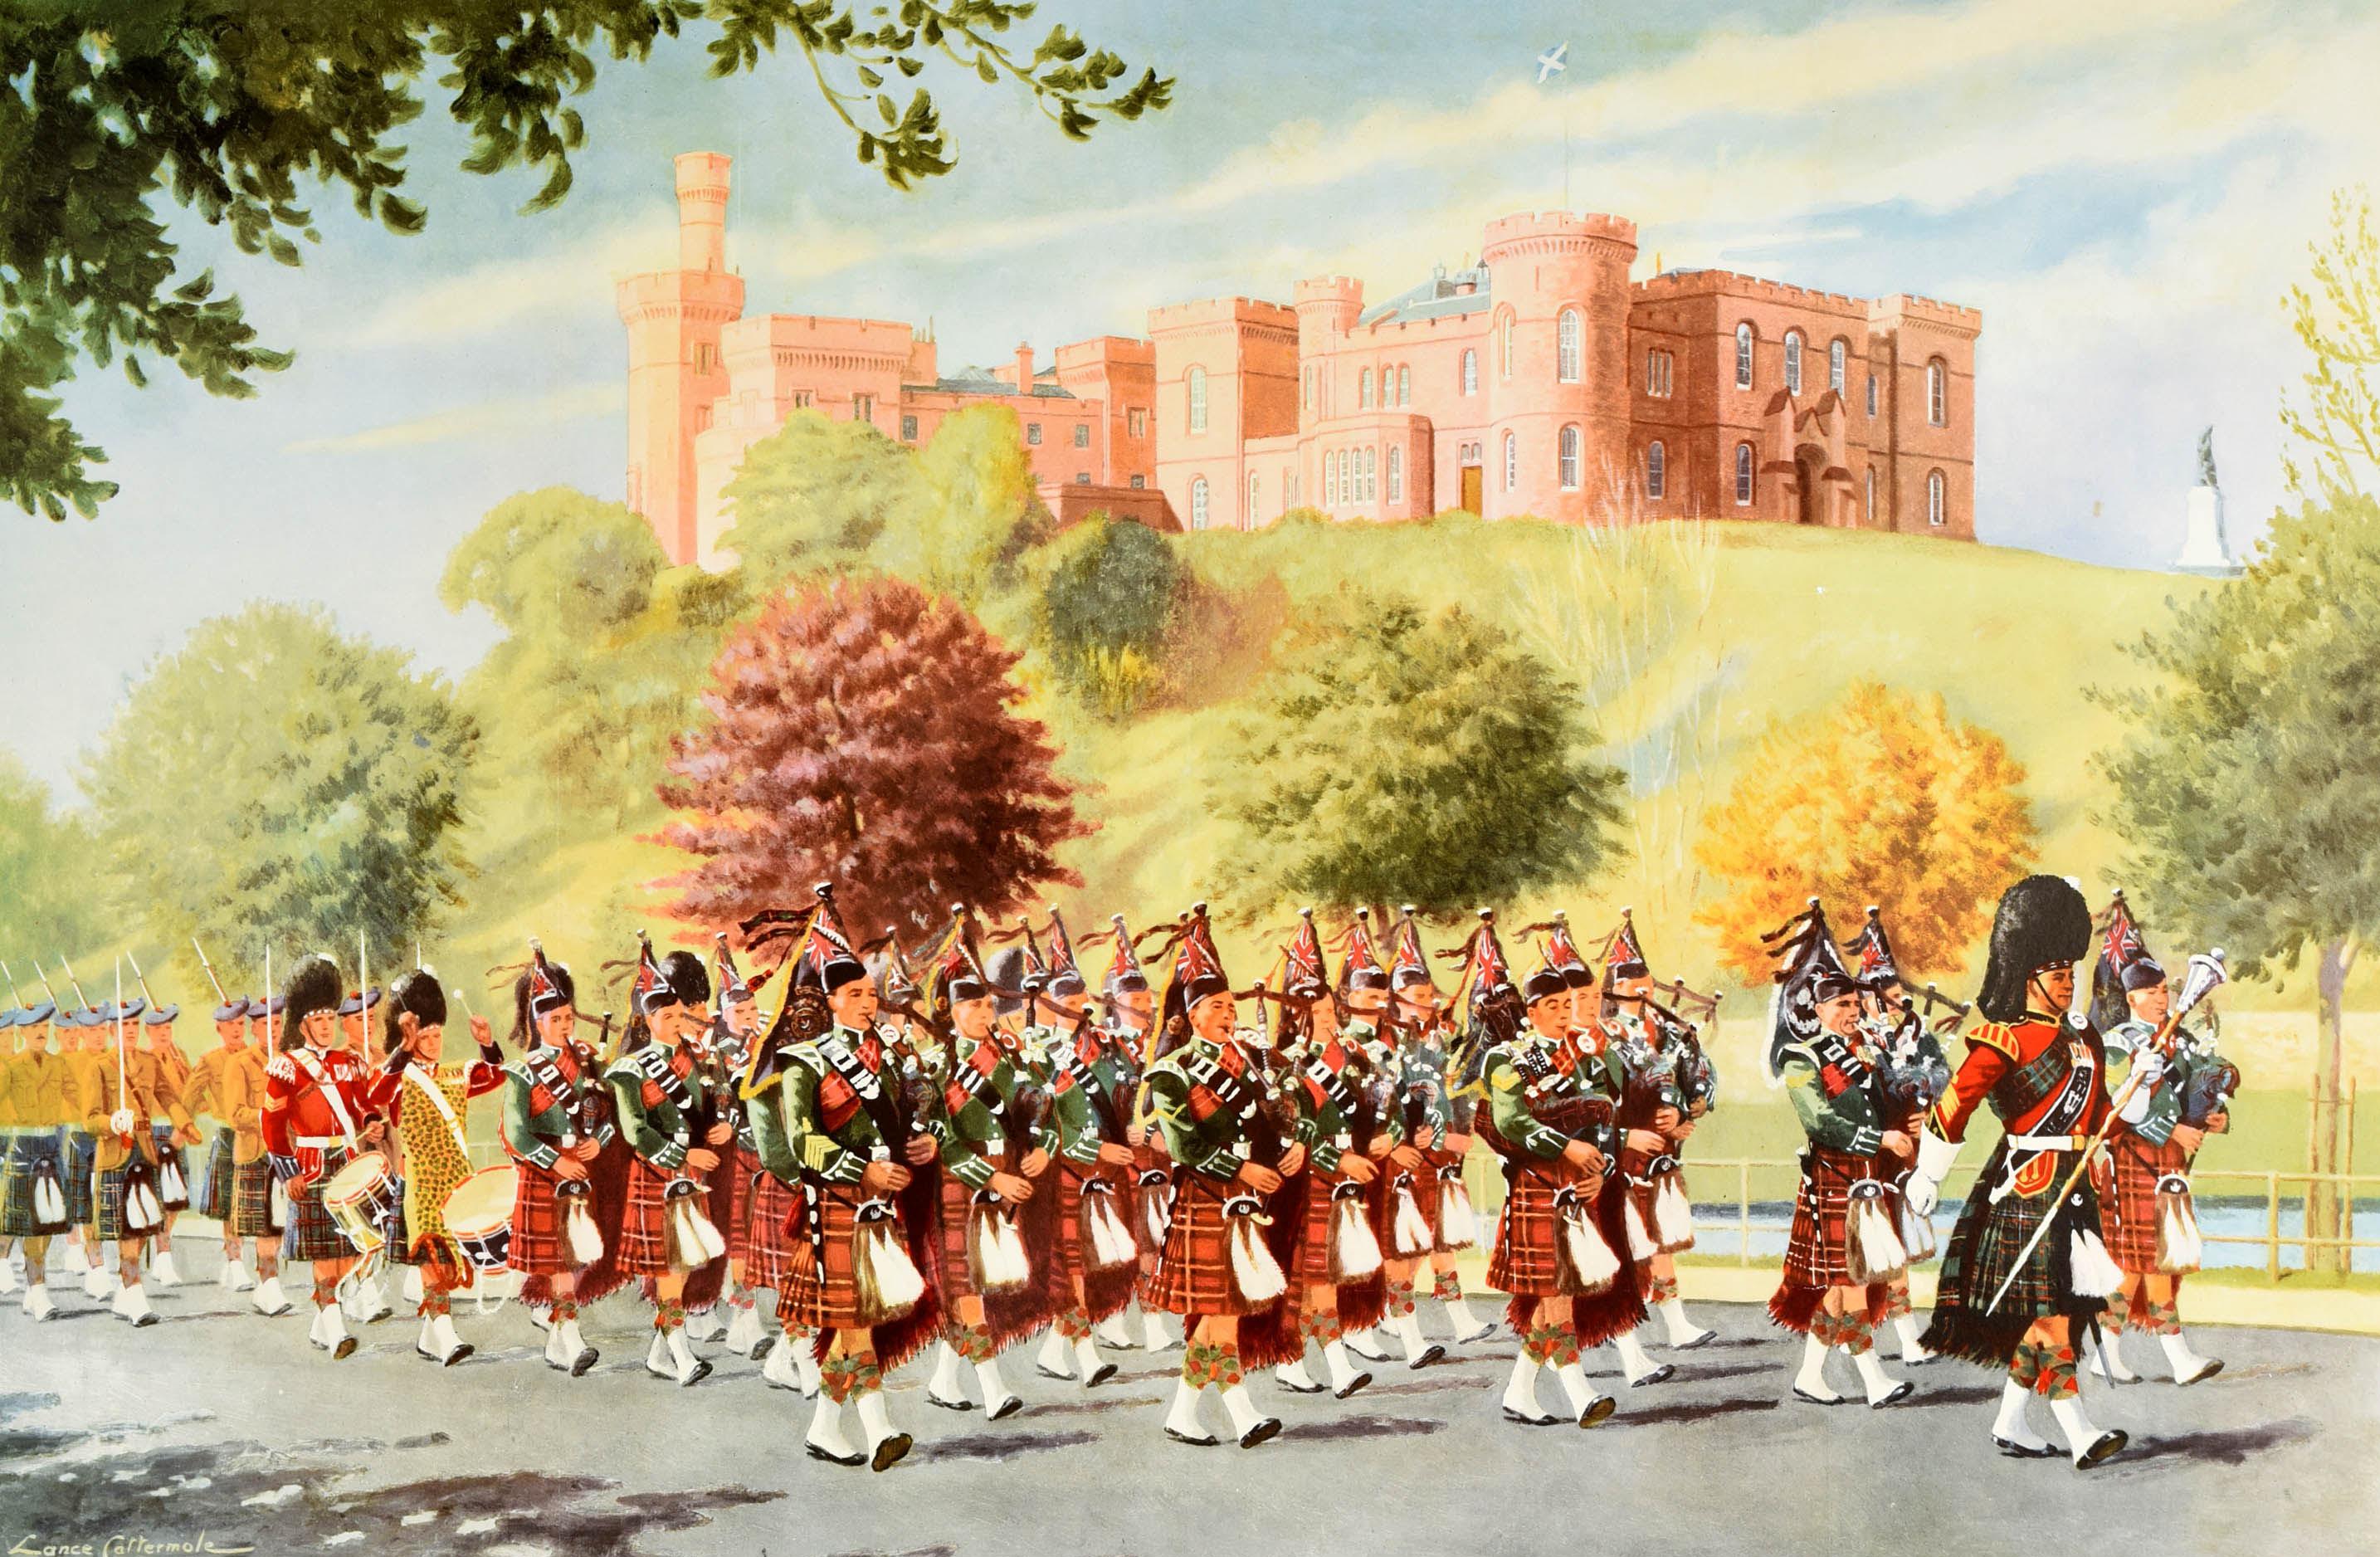 Original vintage rail travel poster for Inverness The Capital Of The Scottish Highlands See Britain By Train British Railways featuring artwork depicting The Queen's Own Cameron Highlanders Marching Along Ness Walk by Lance Cattermole (1898-1992).